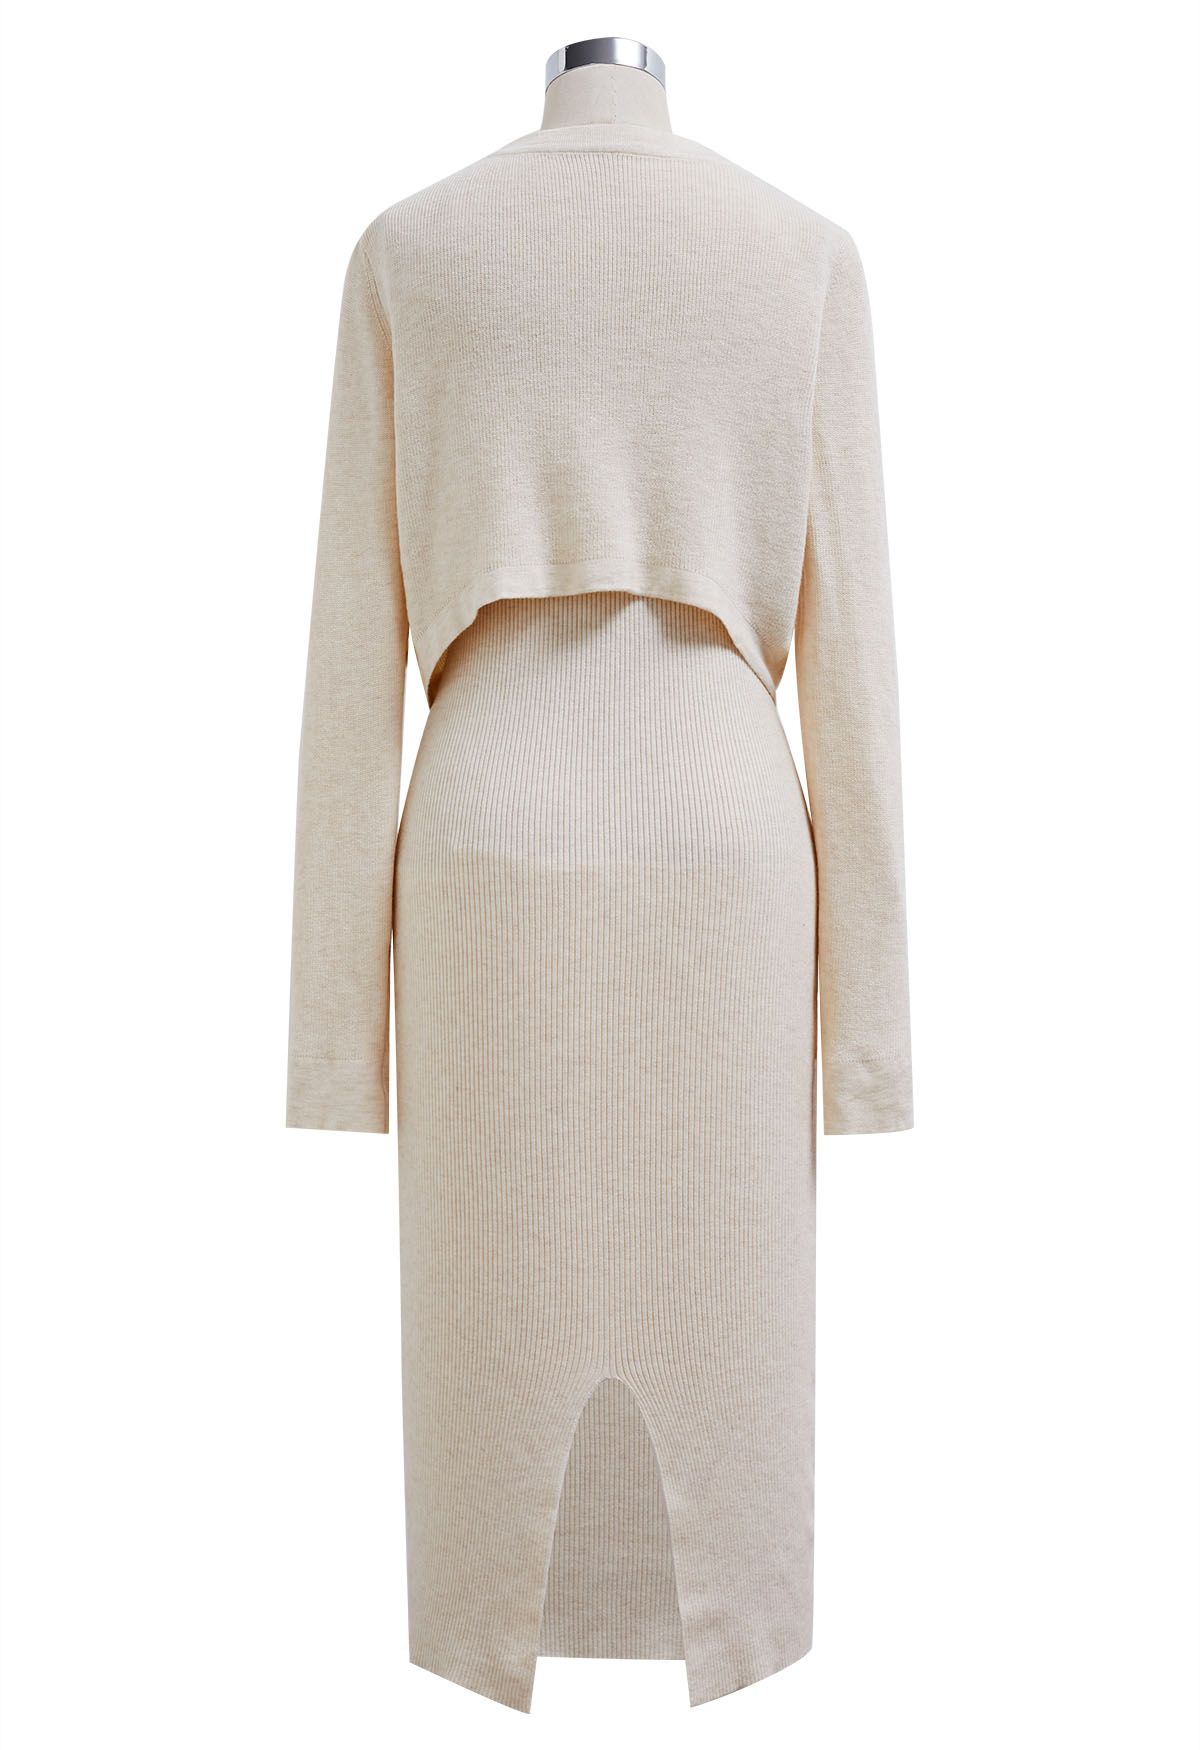 Cutout Halter Neck Knit Dress and Cardigan Set in Cream